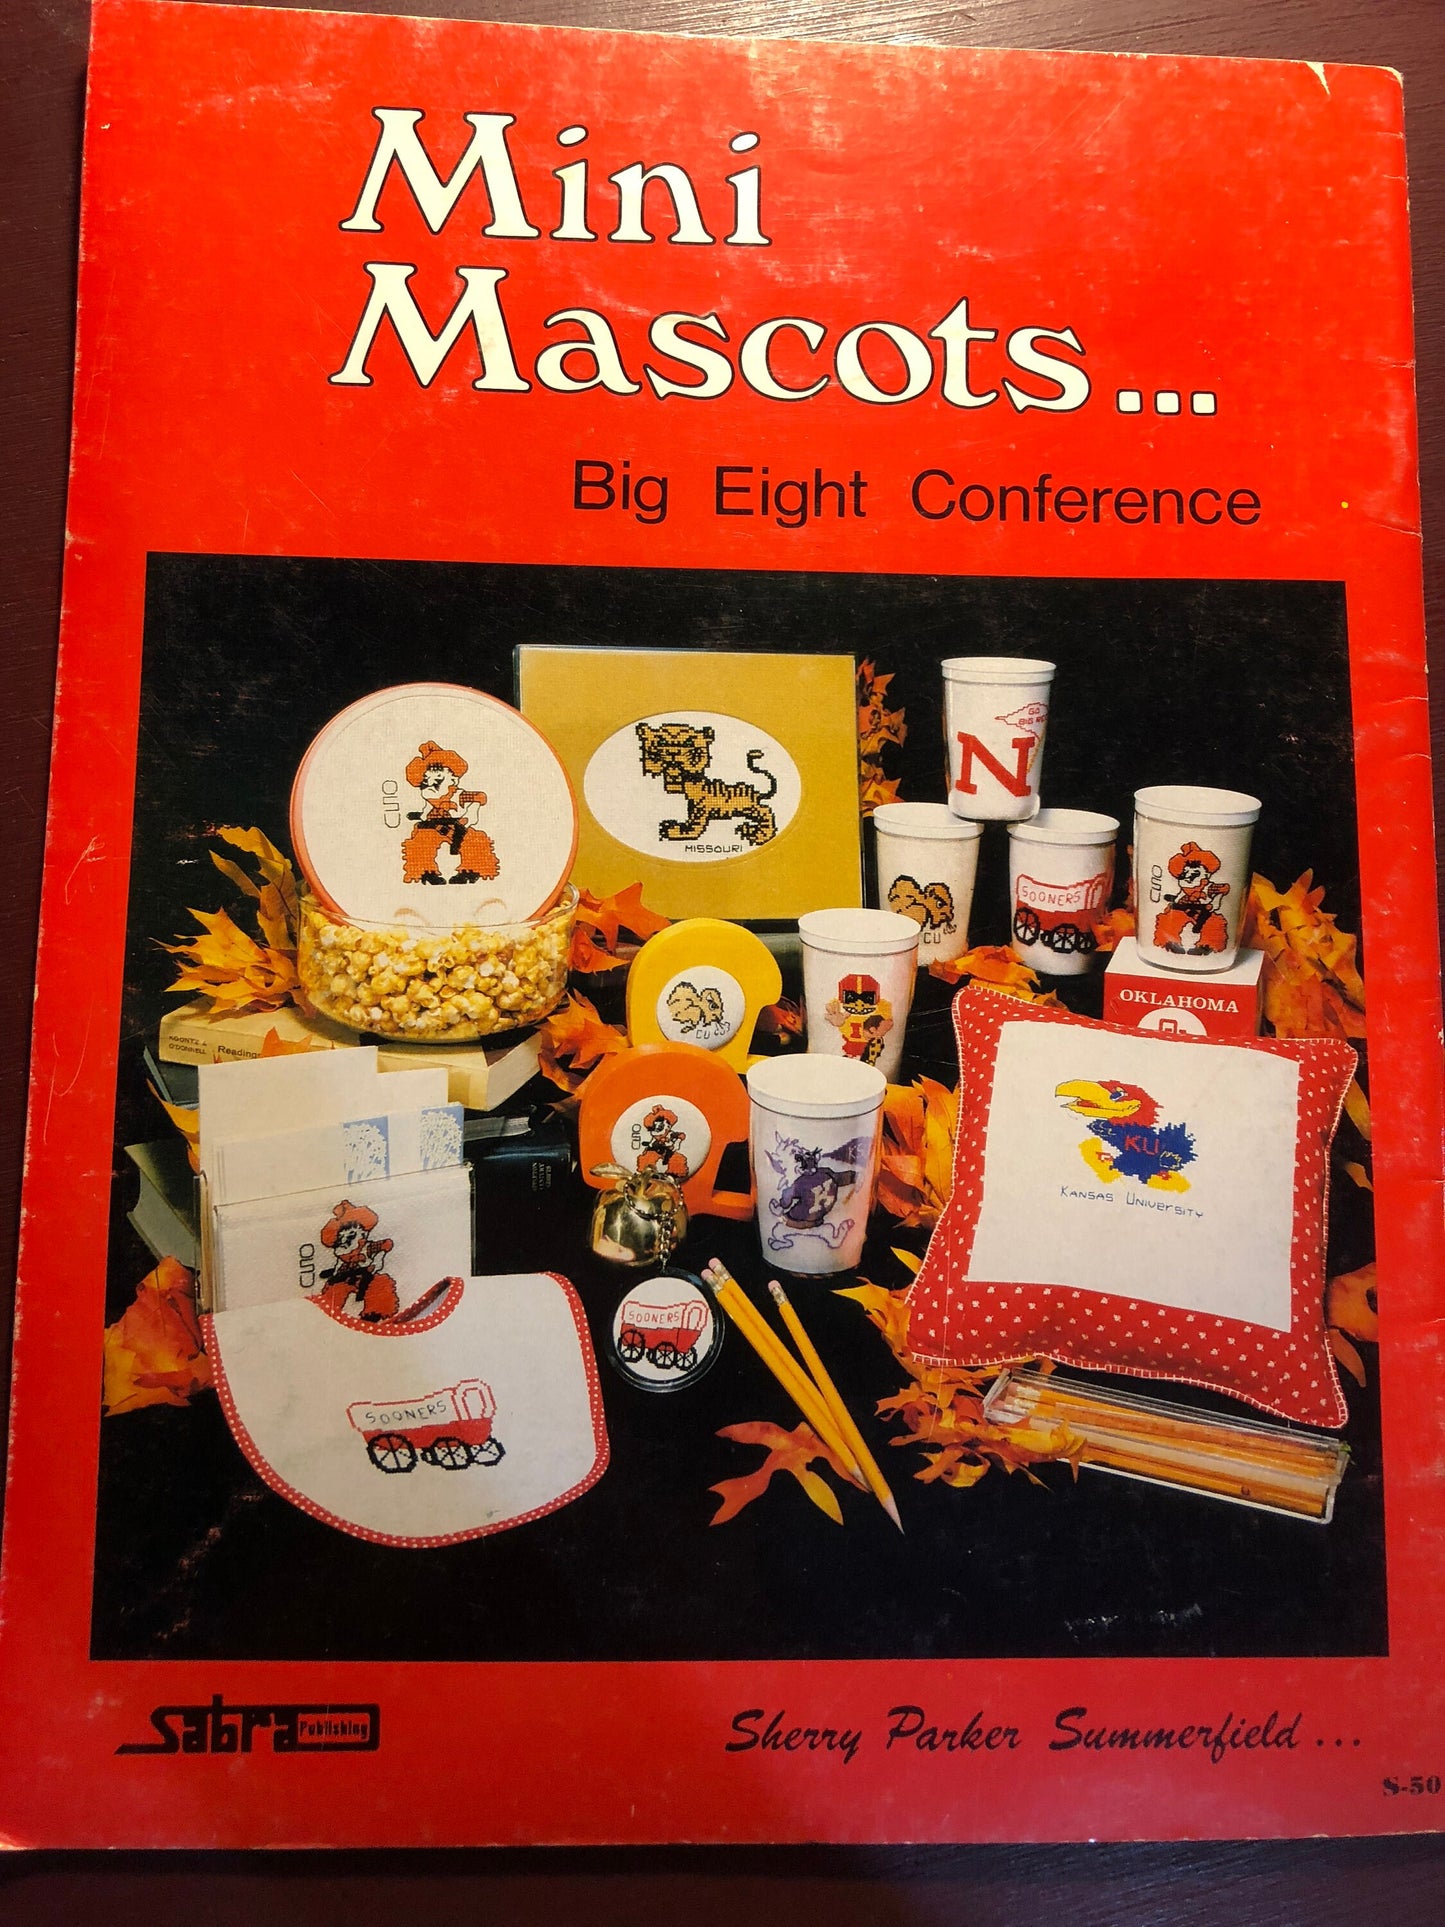 Sabra, Mini Mascots, Big Eight Conference, Sherry Parker Summerfield, Vintage 1982, Counted Cross Stitch Pattern Book